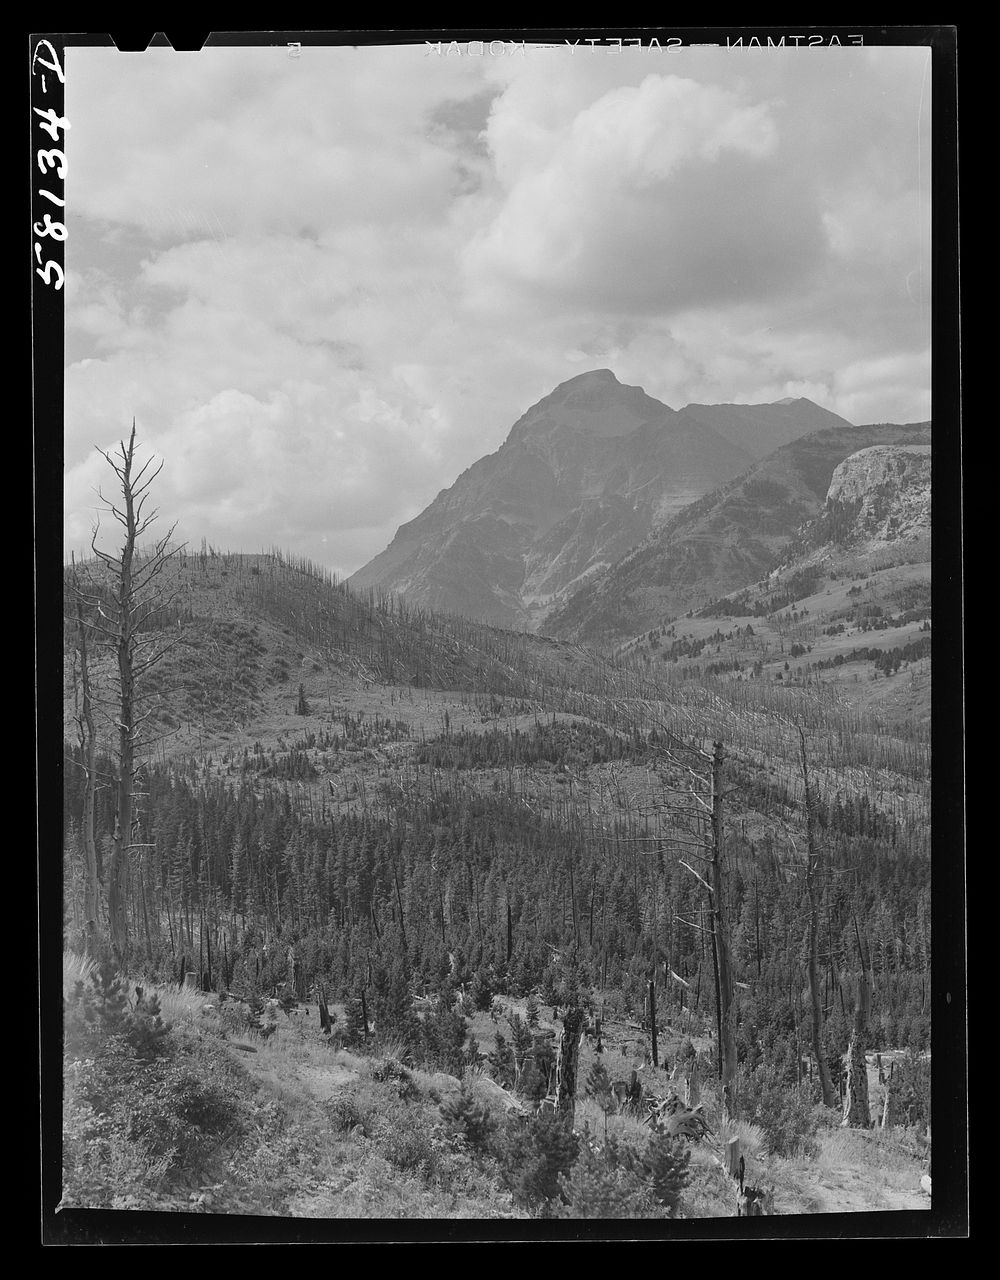 Burnt-over land. Results of forest fires in Glacier National Park, Montana. Sourced from the Library of Congress.